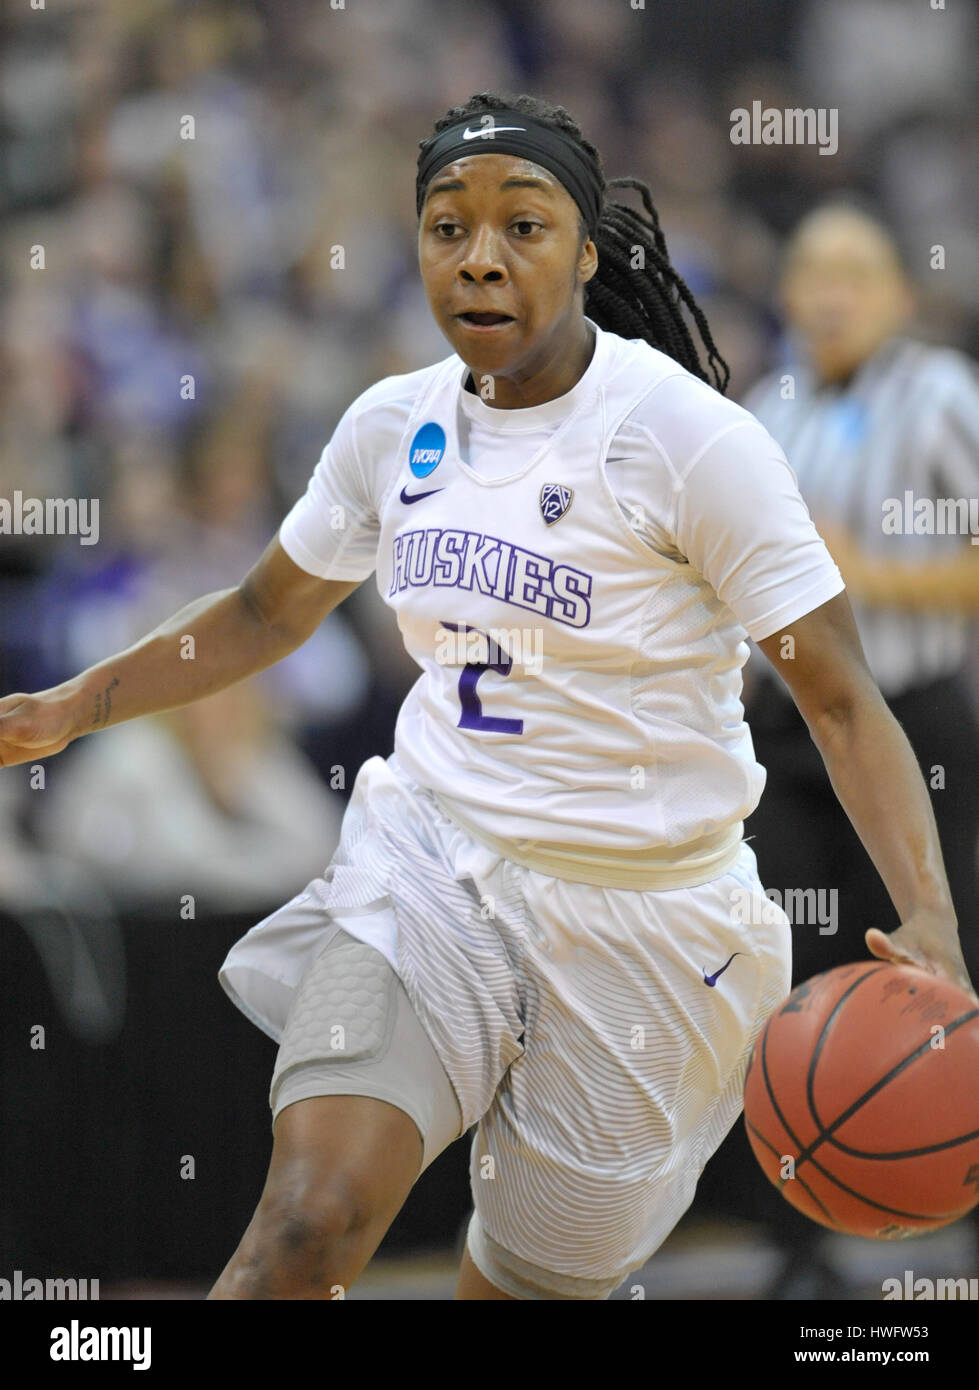 Seattle, WA, USA. 20th Mar, 2017. UW freshman point guard Aarion McDonald (2) in action during a NCAA second round women's game between the Oklahoma Sooners and the Washington Huskies. The game was played at Hec Ed Pavilion on the University of Washington campus in Seattle, WA. Jeff Halstead/CSM/Alamy Live News Stock Photo